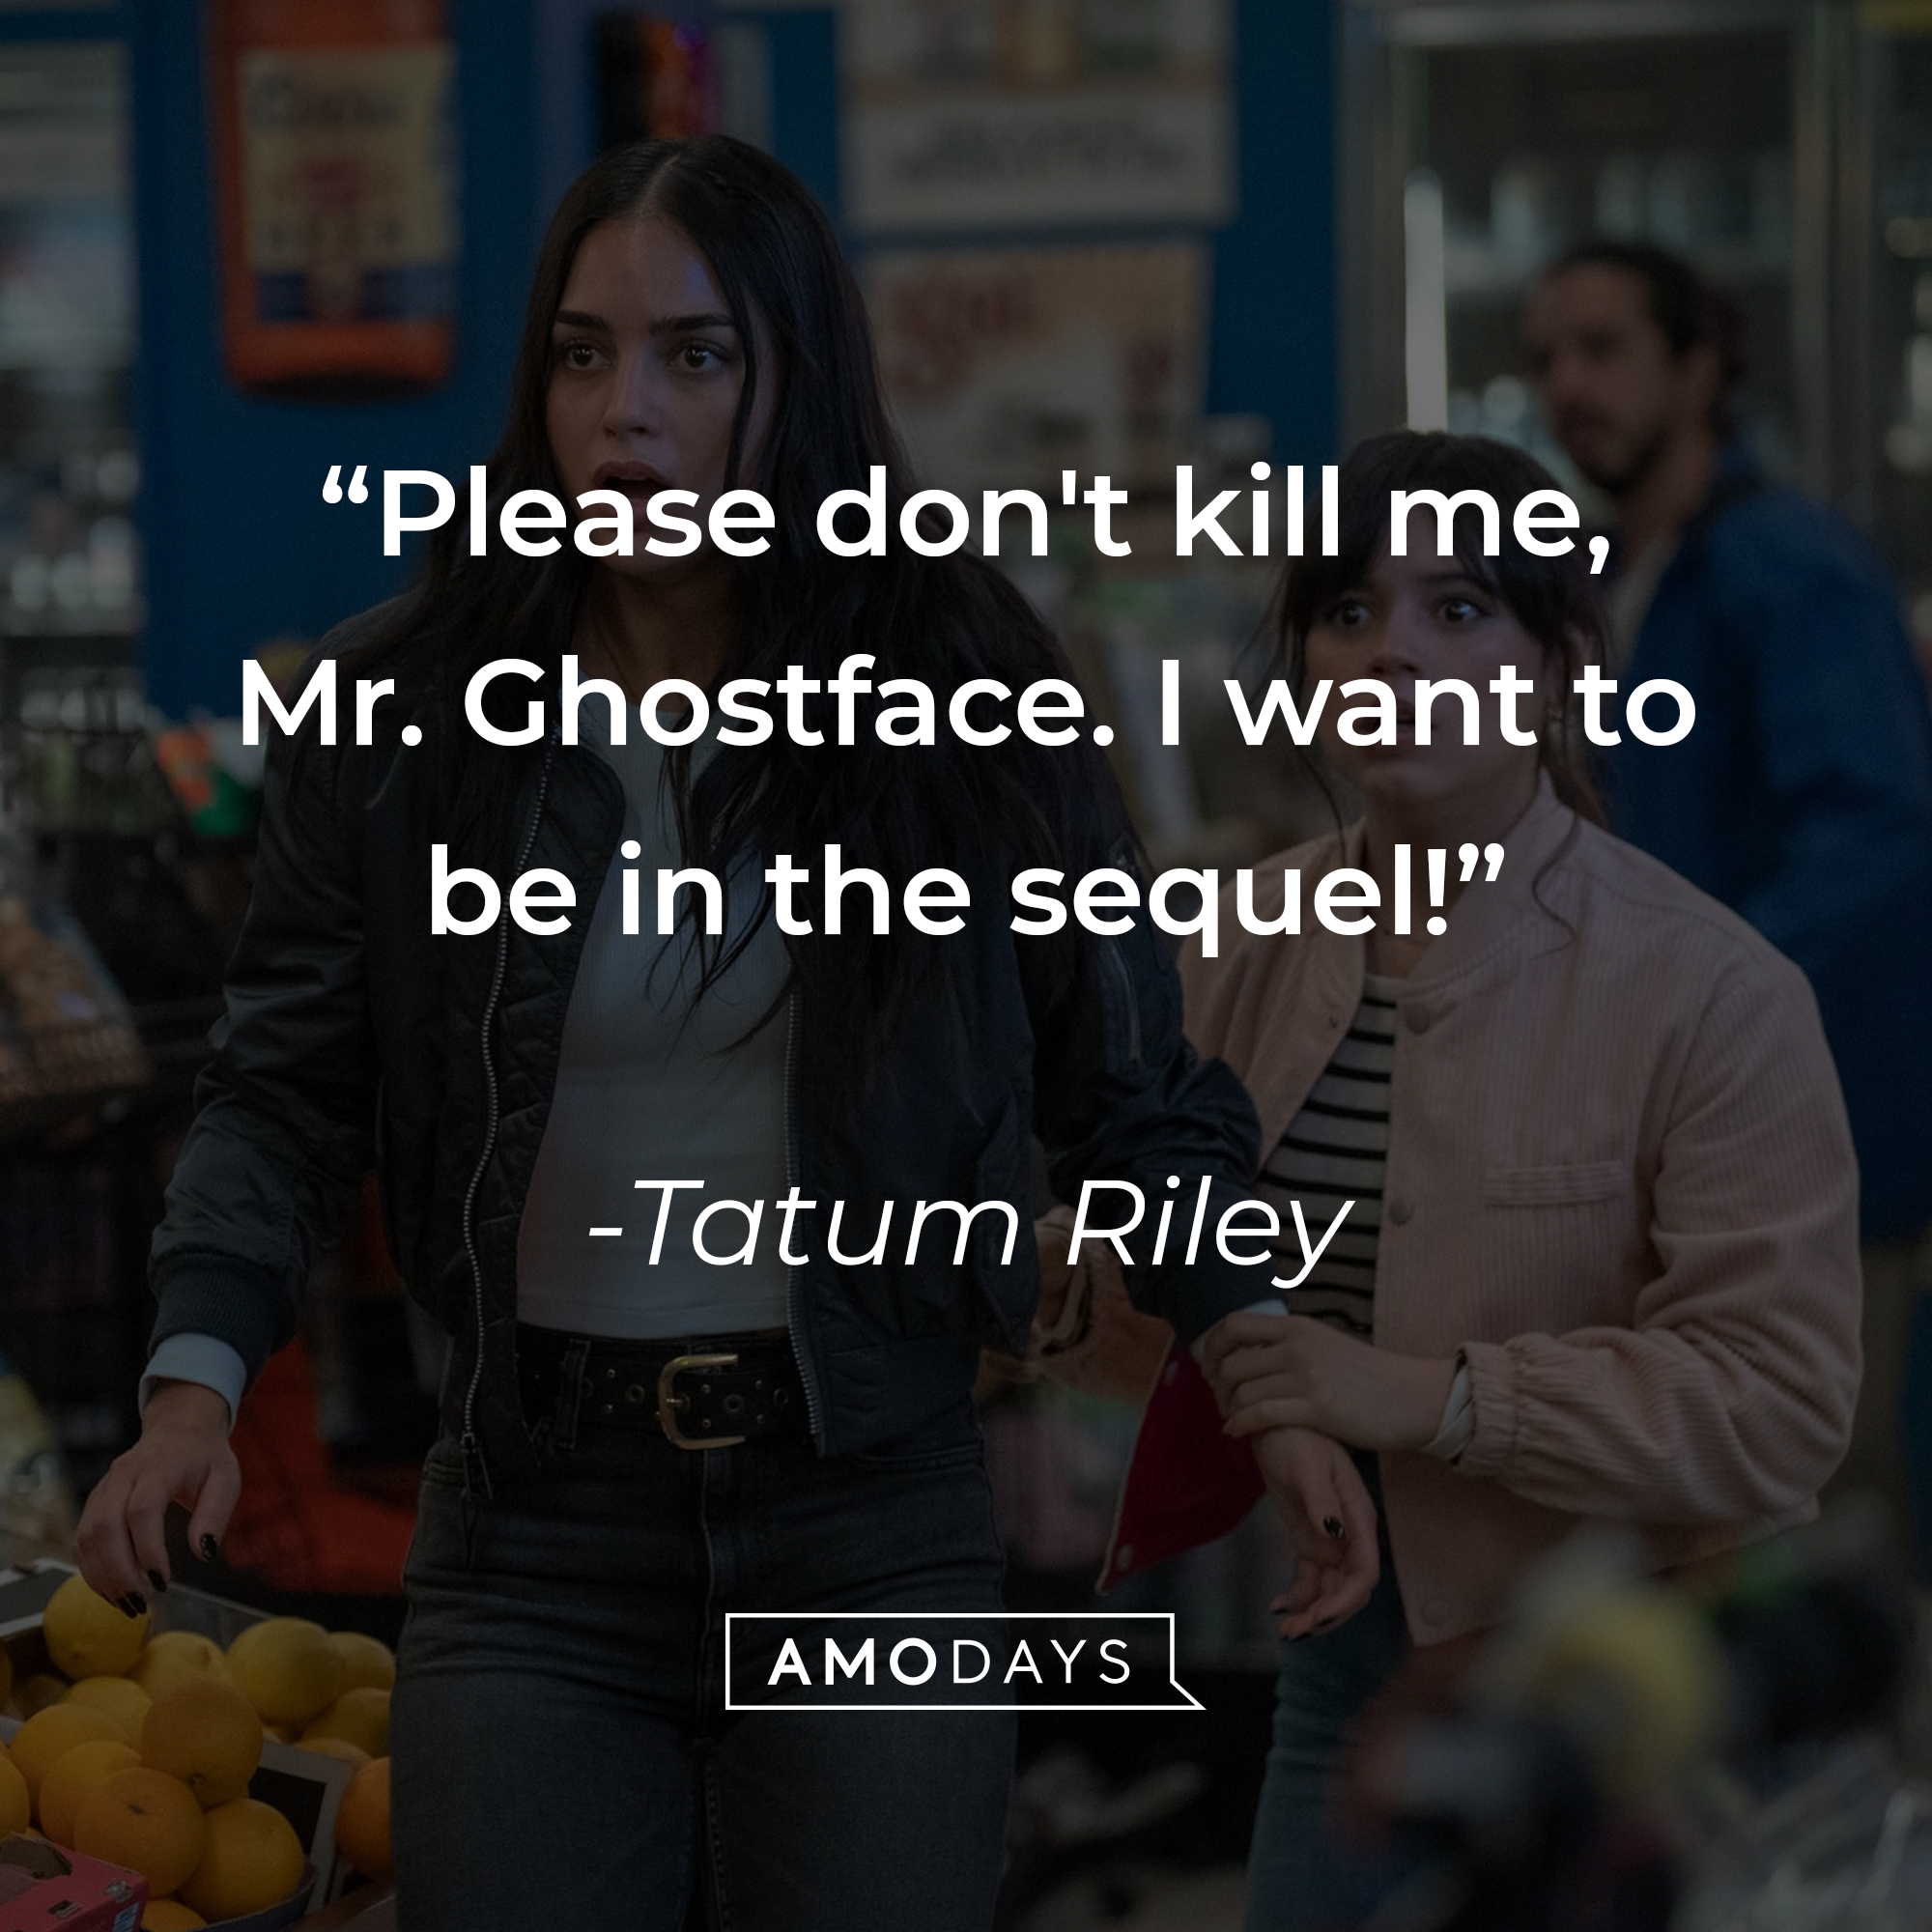 A photo from "Scream 6" with the quote, "Please don't kill me, Mr. Ghostface. I want to be in the sequel!" | Source: Facebook/ScreamMovies